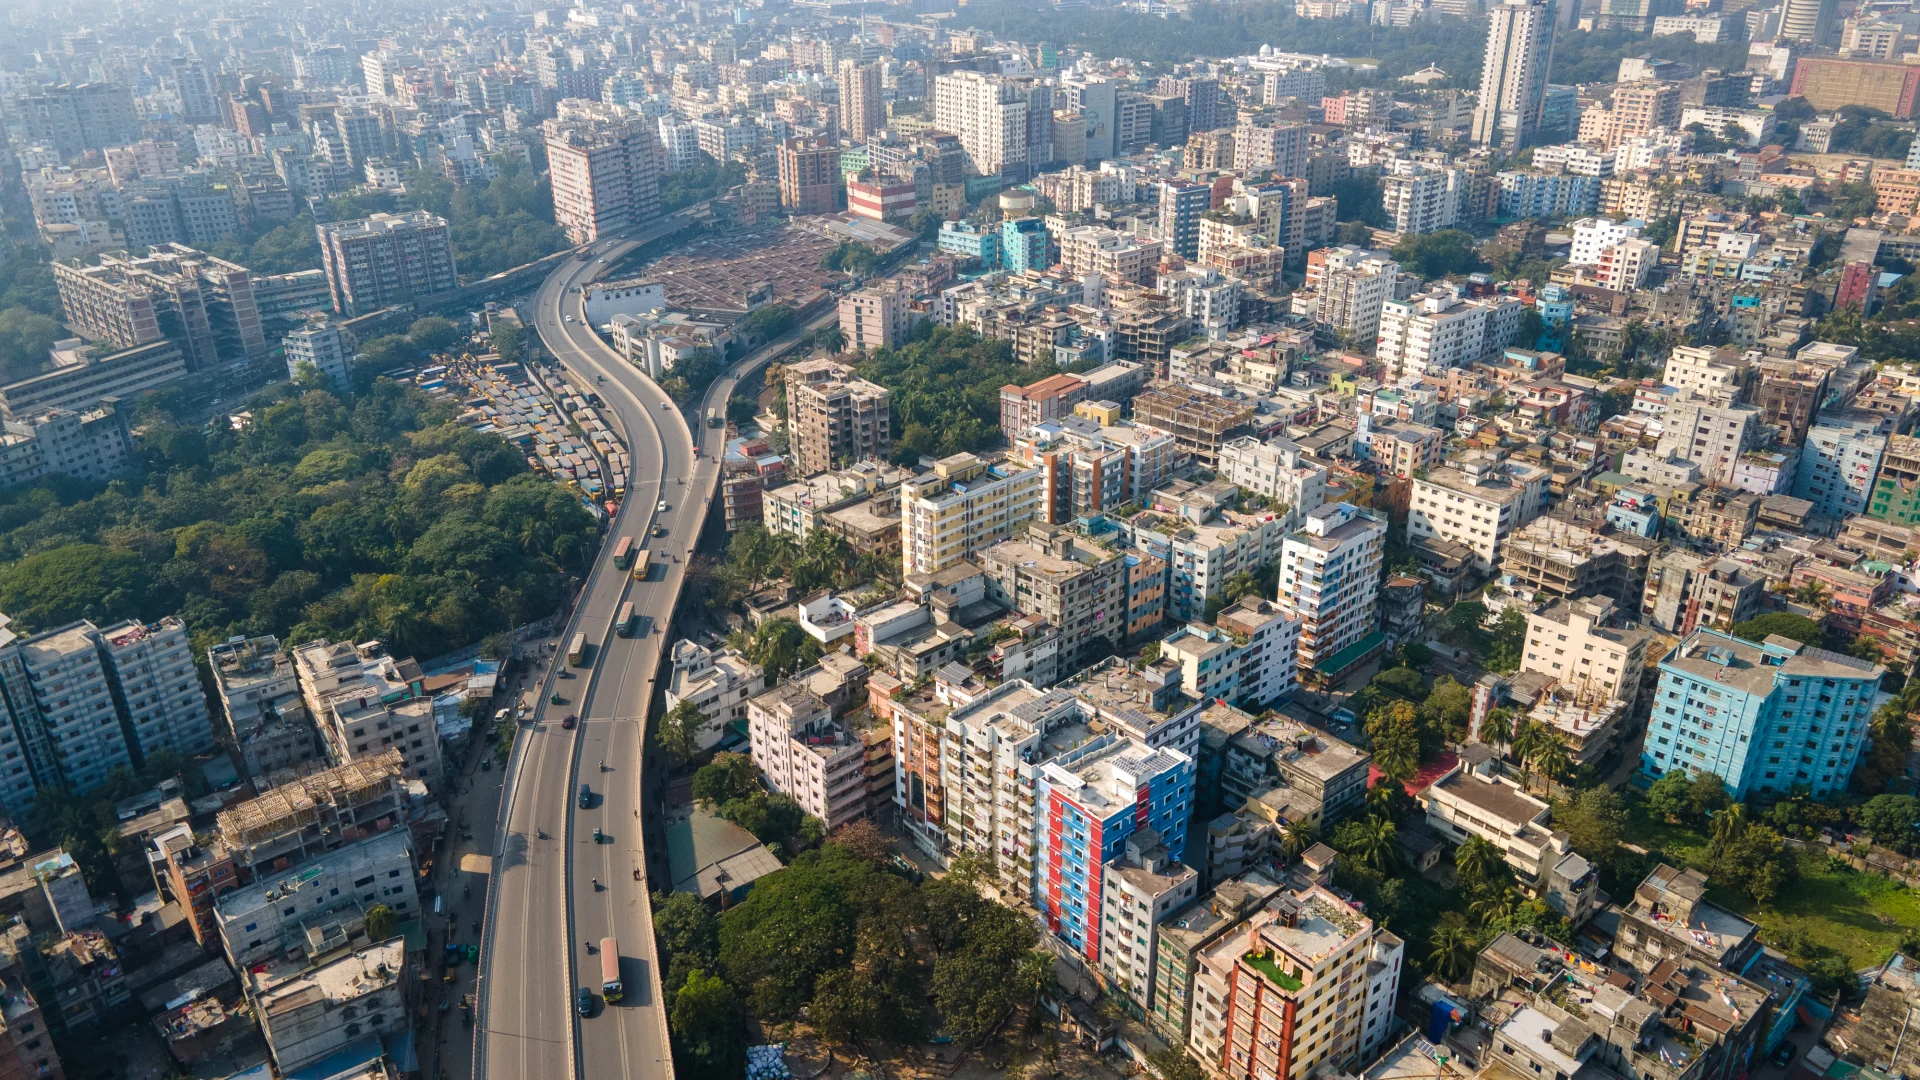 View of city in Bangladesh